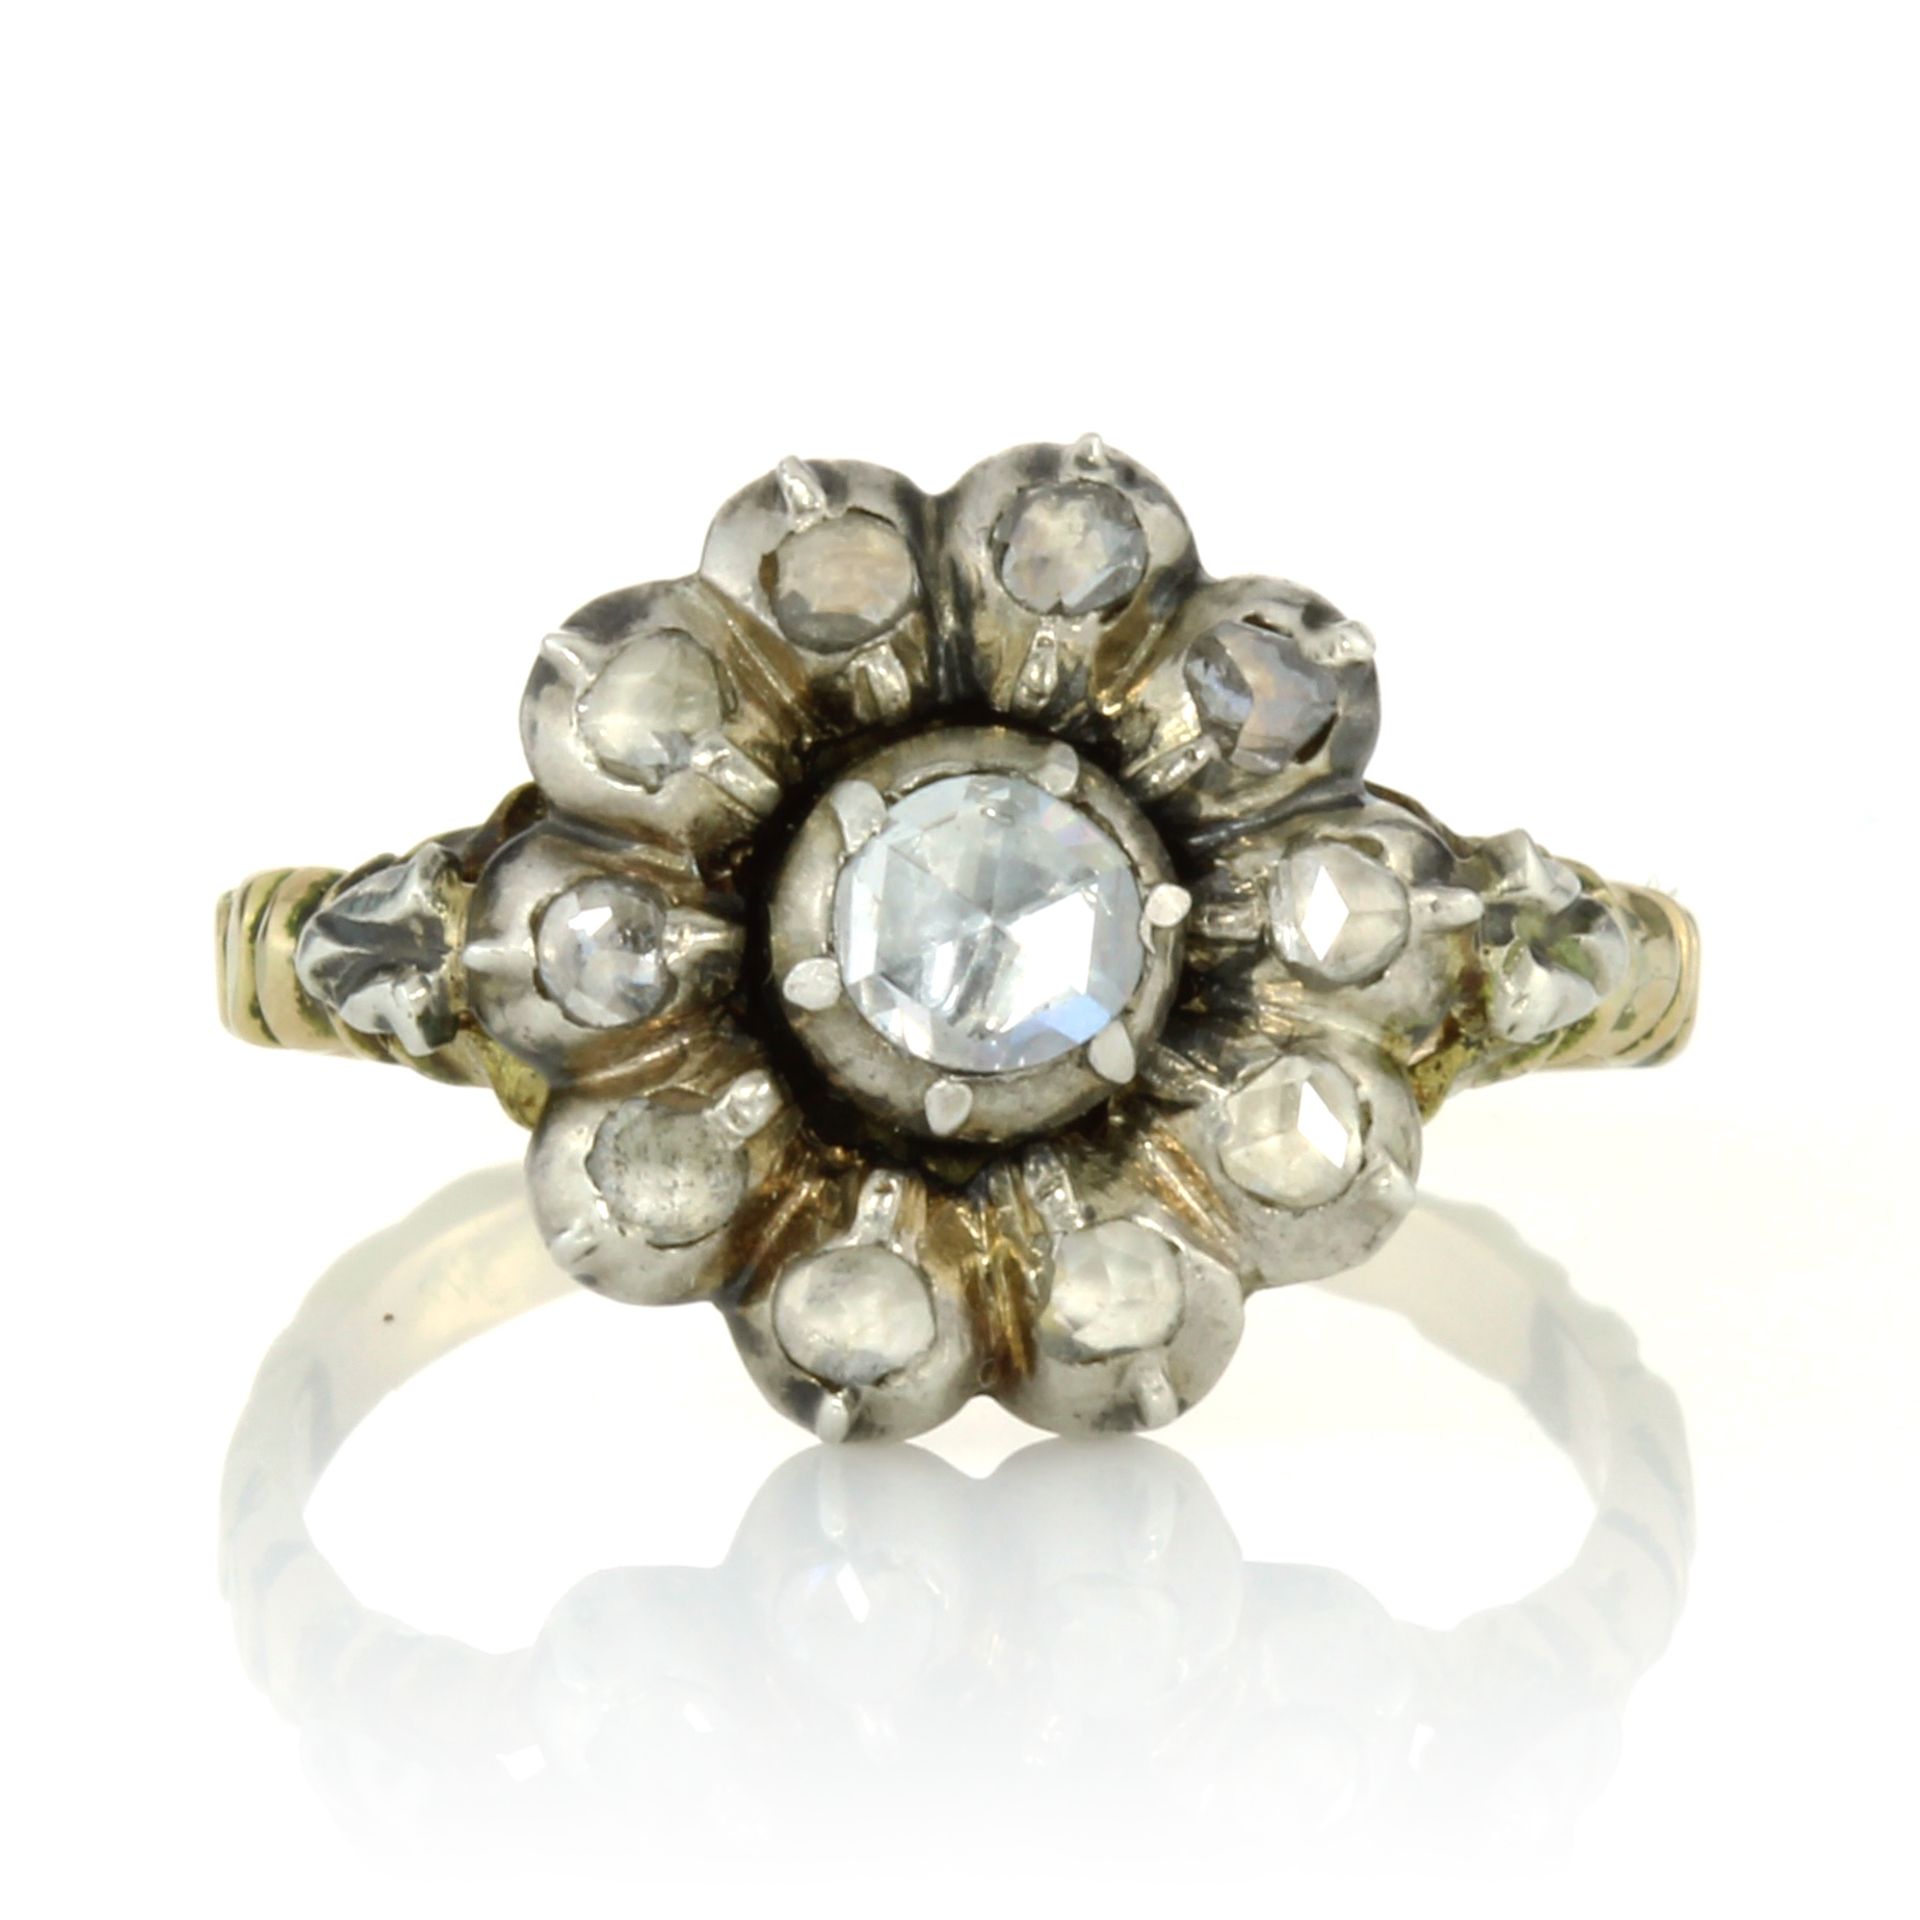 AN ANTIQUE DIAMOND CLUSTER DRESS RING set with a central rose cut diamond encircled by border of ten